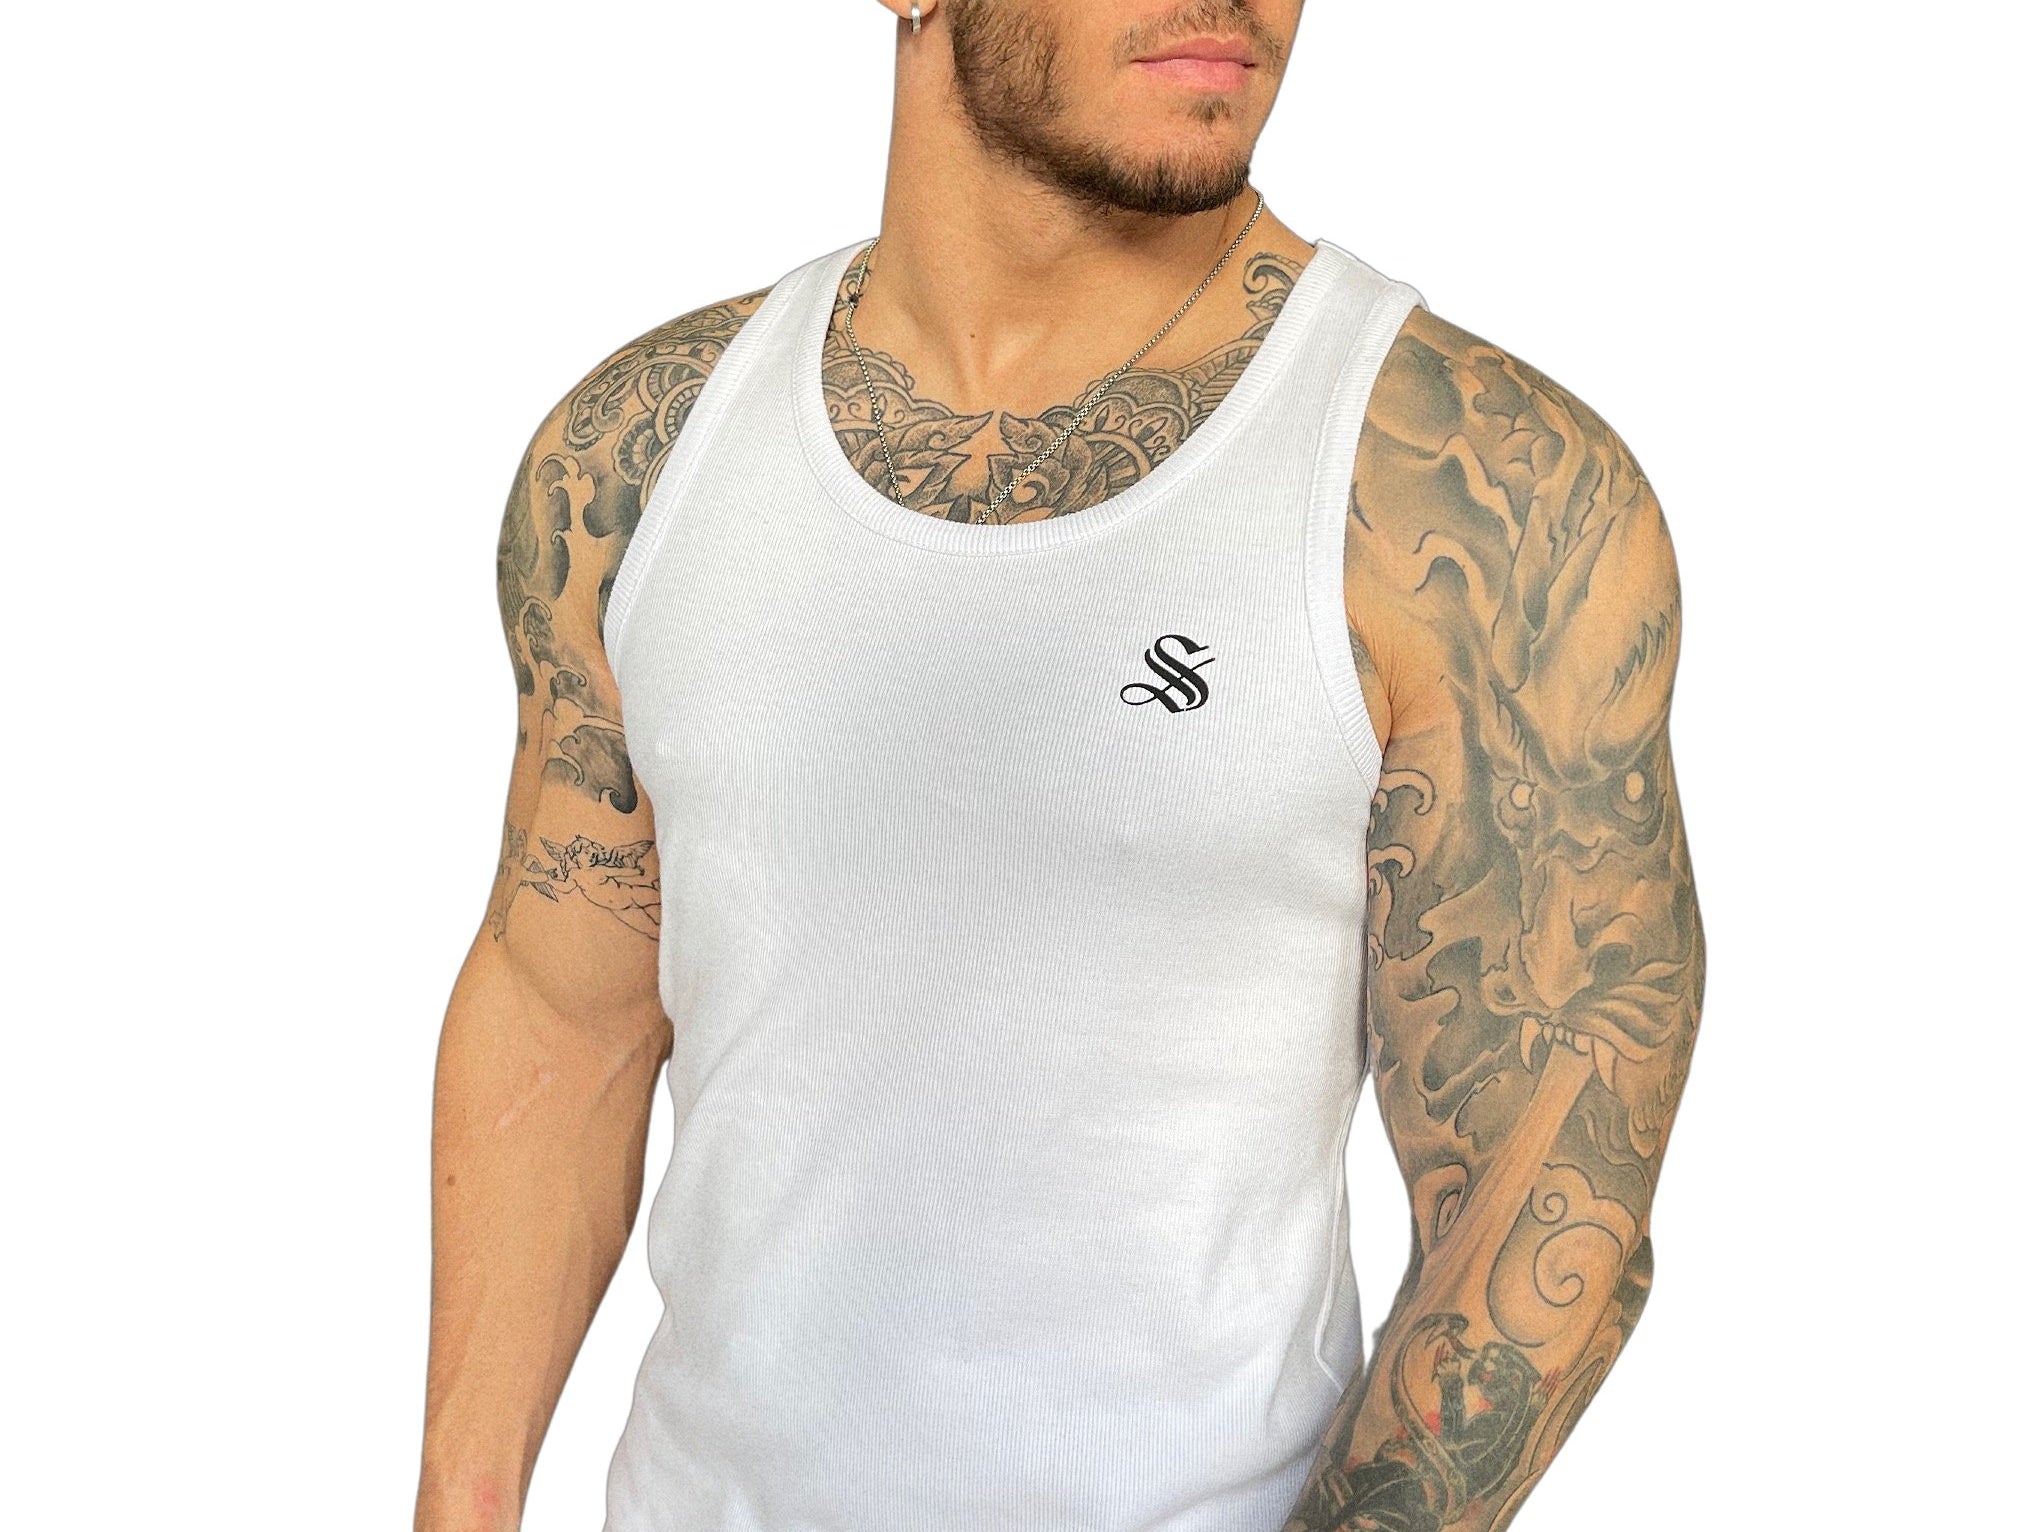 Angel Face - White Tank Top for Men - Sarman Fashion - Wholesale Clothing Fashion Brand for Men from Canada